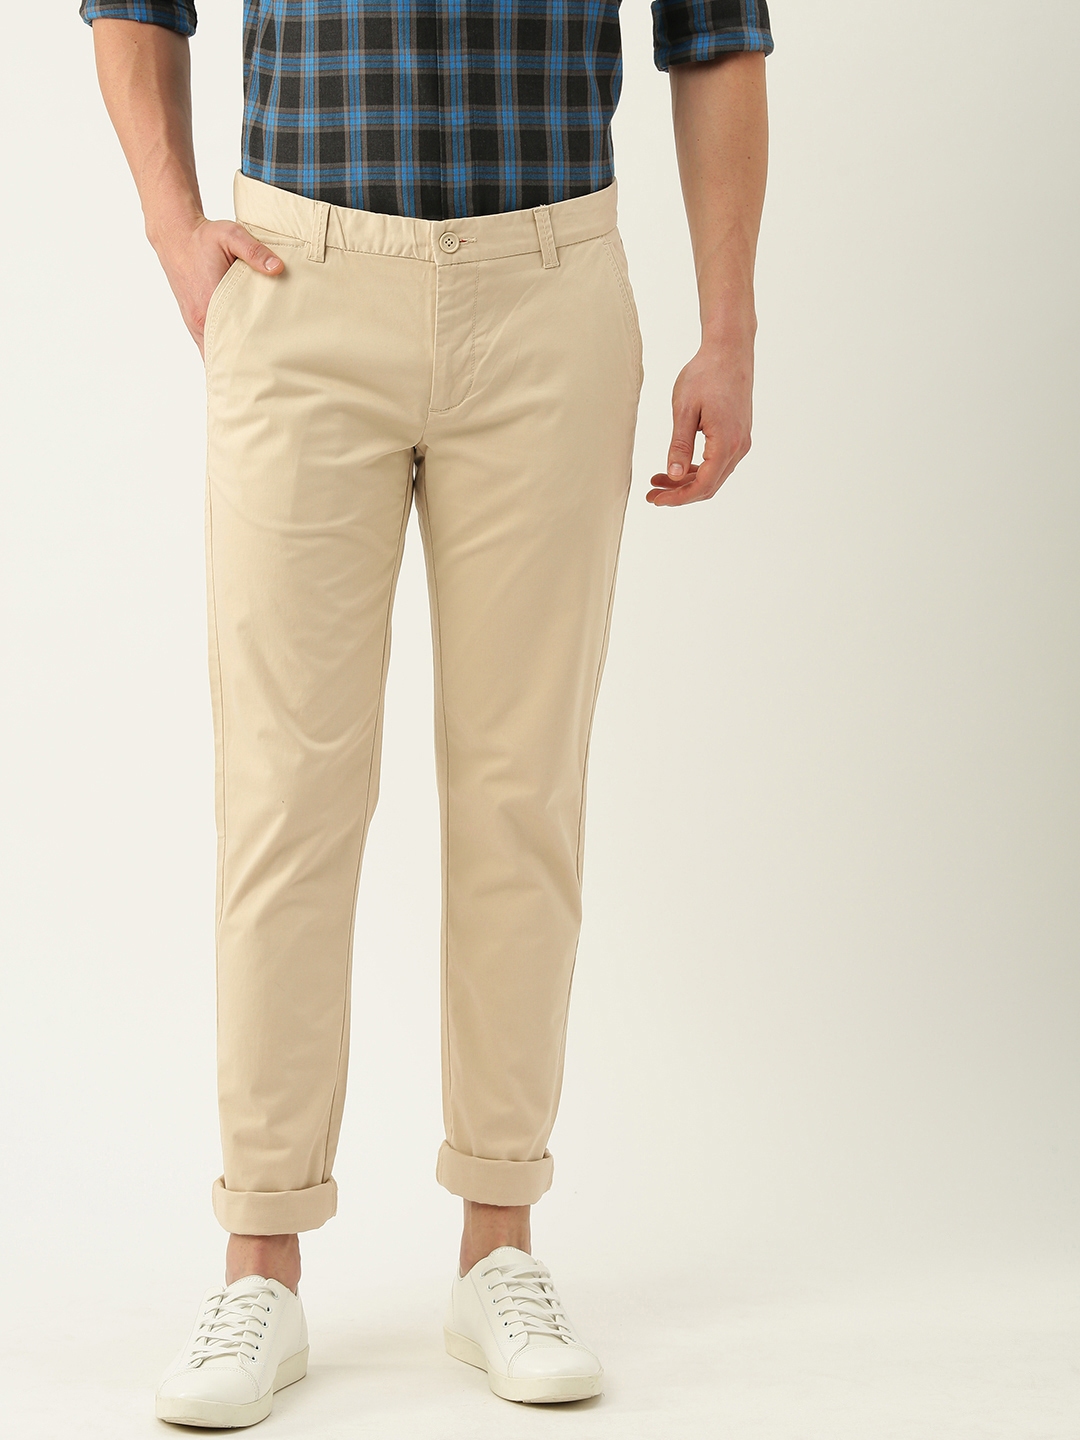 Buy United Colors Of Benetton Men Beige Slim Fit Casual Trousers  Trousers  for Men 1780597  Myntra